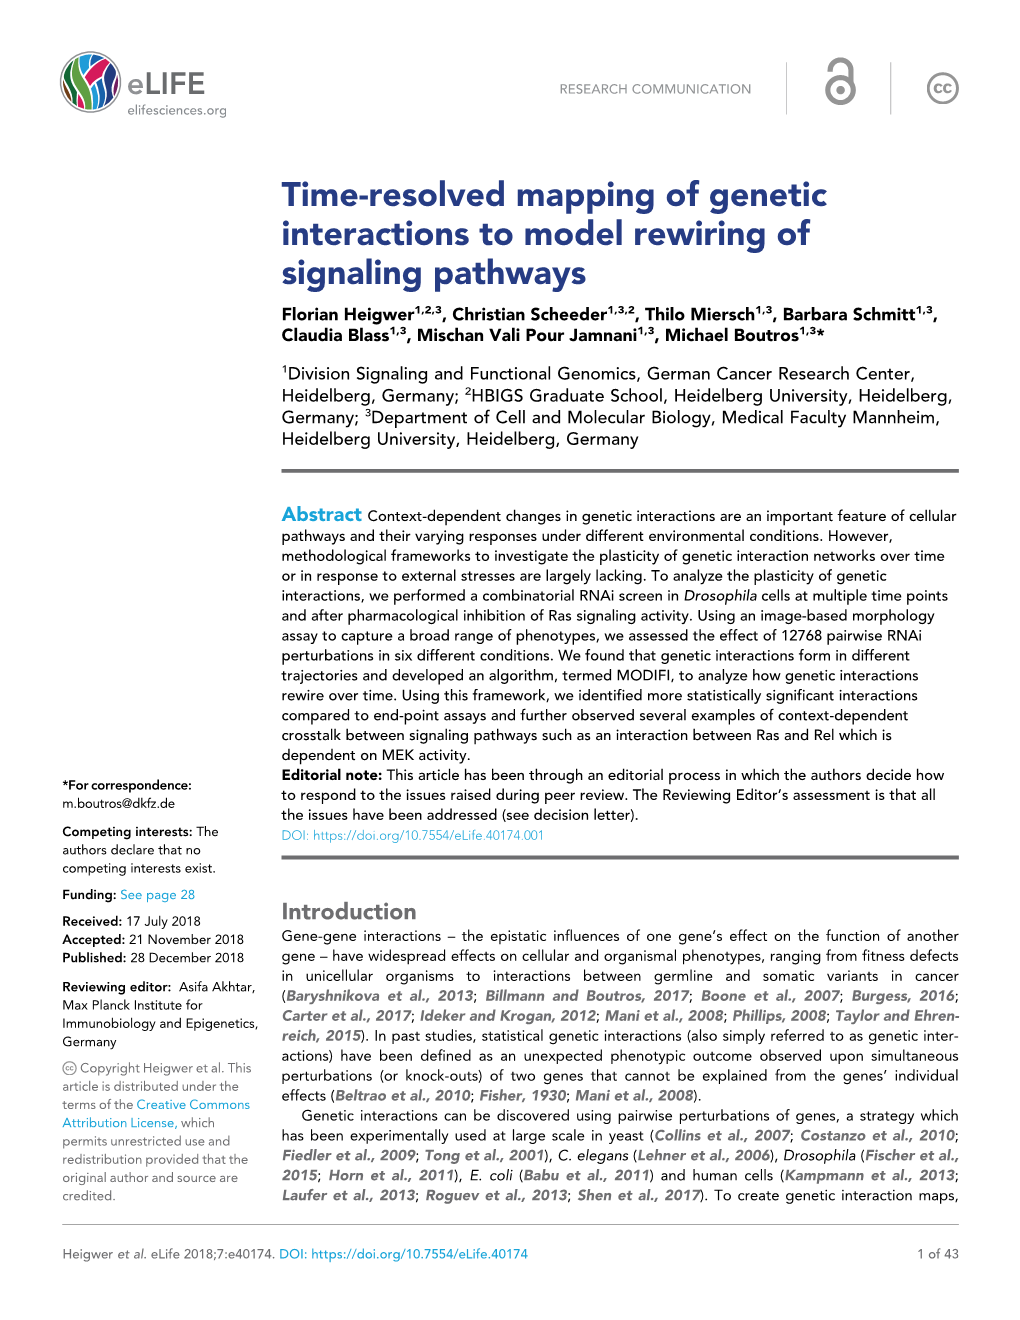 Time-Resolved Mapping of Genetic Interactions to Model Rewiring Of